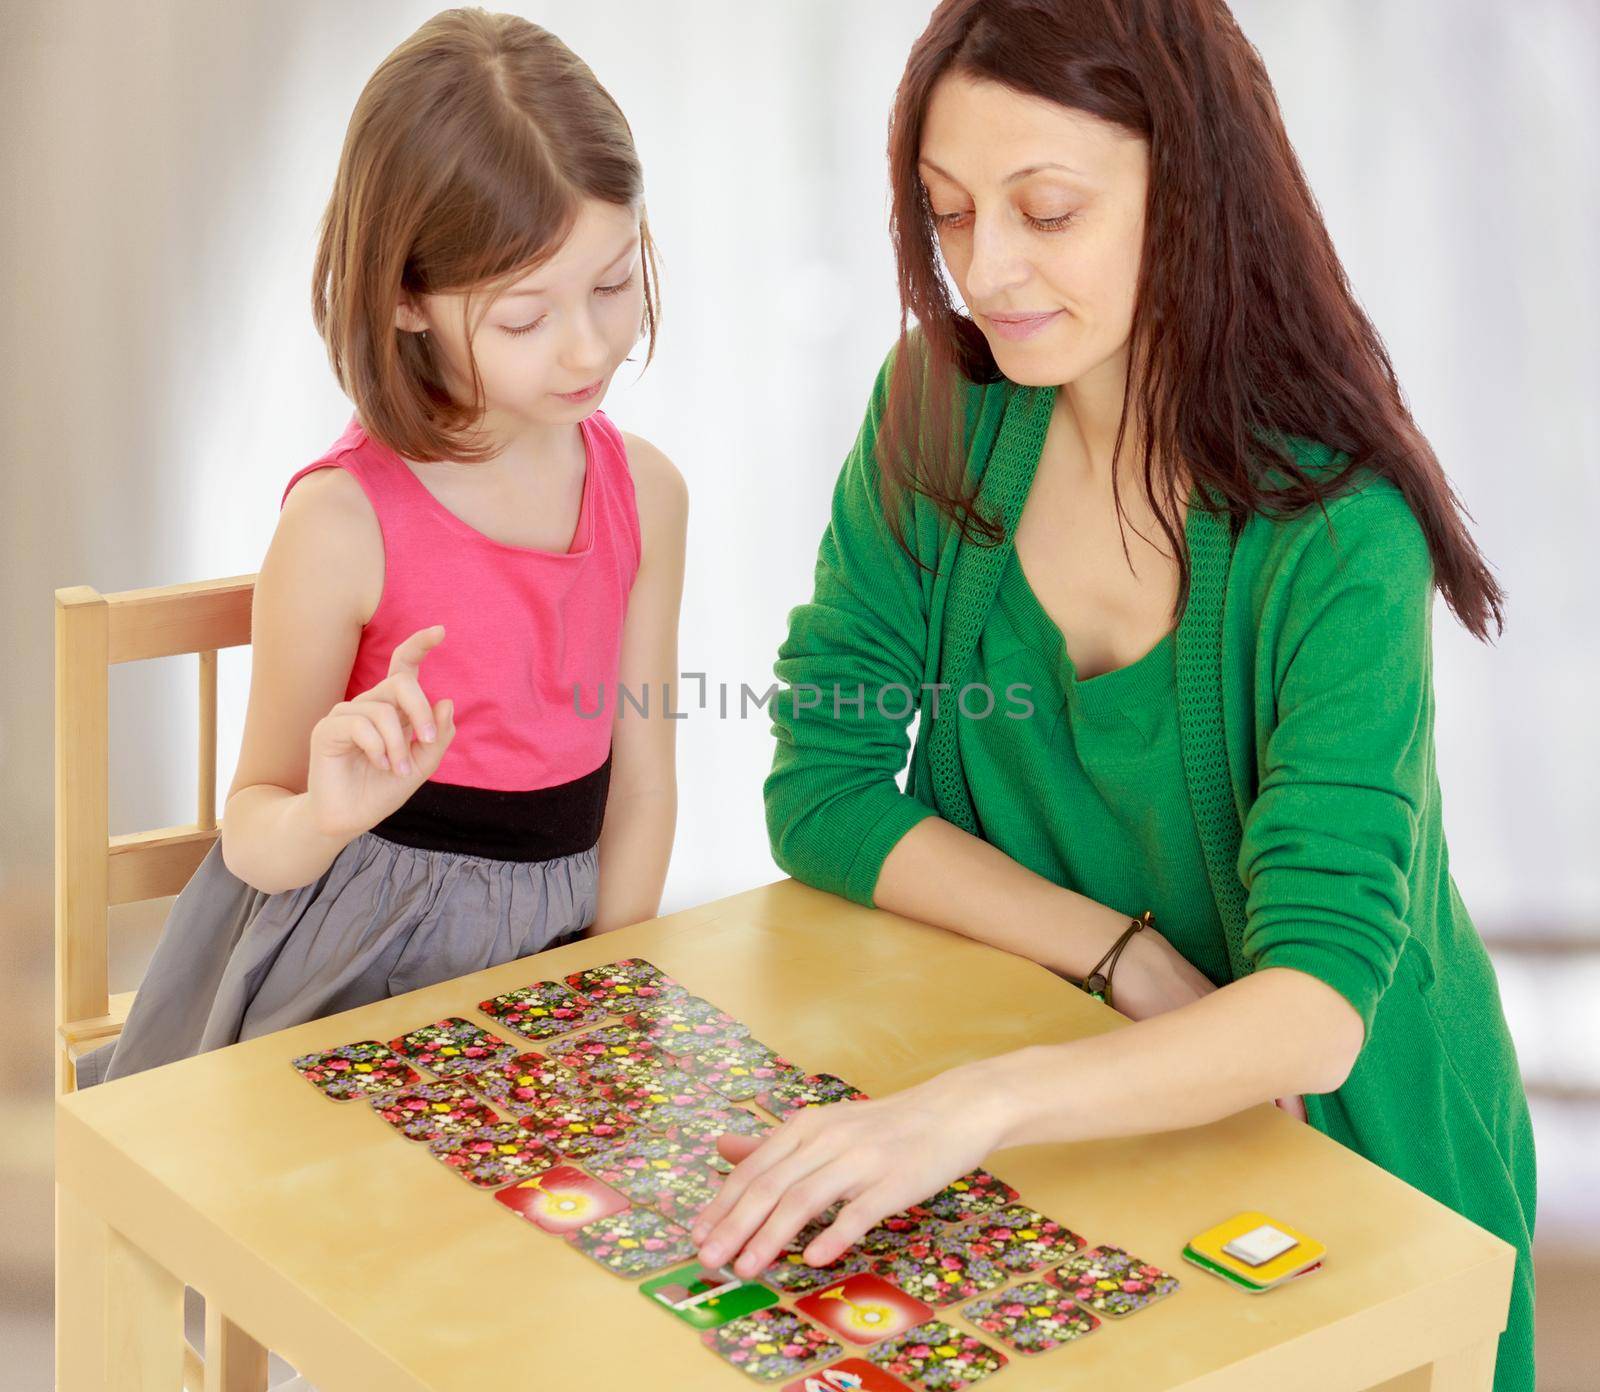 Pensive little girl and her teacher at the table laid out cards with pictures.In a room with a large semi-circular window.